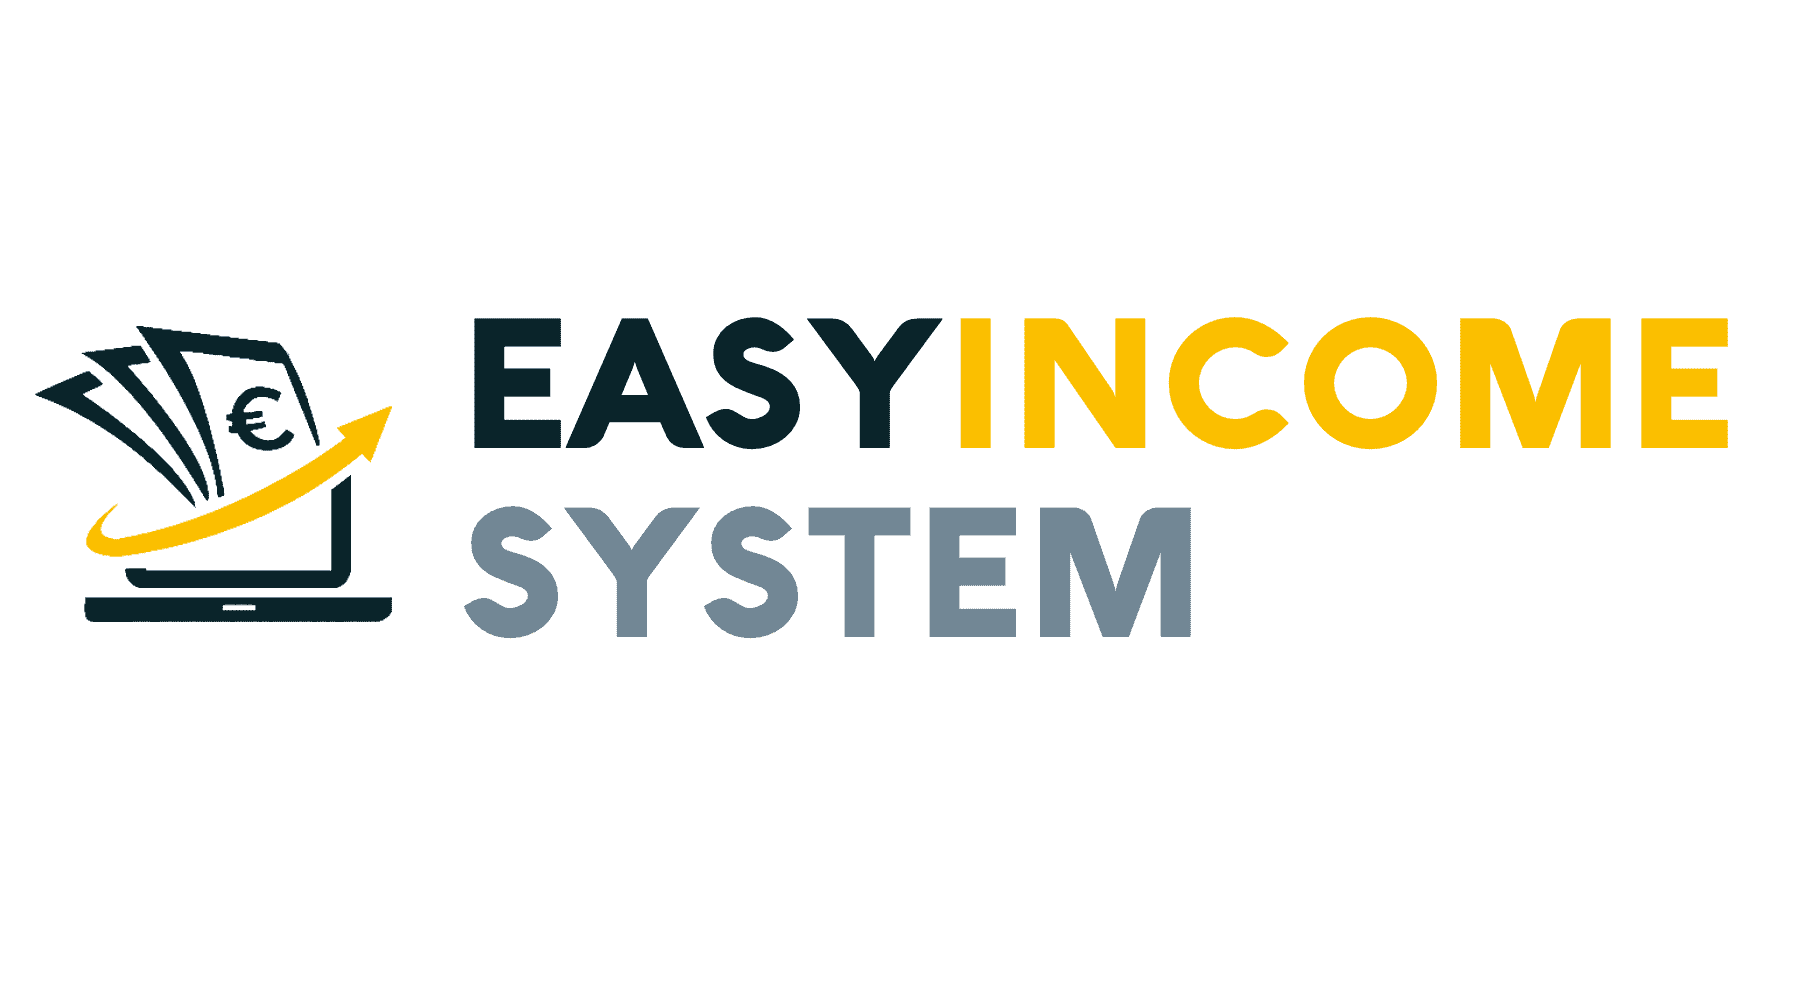 easy income system logo